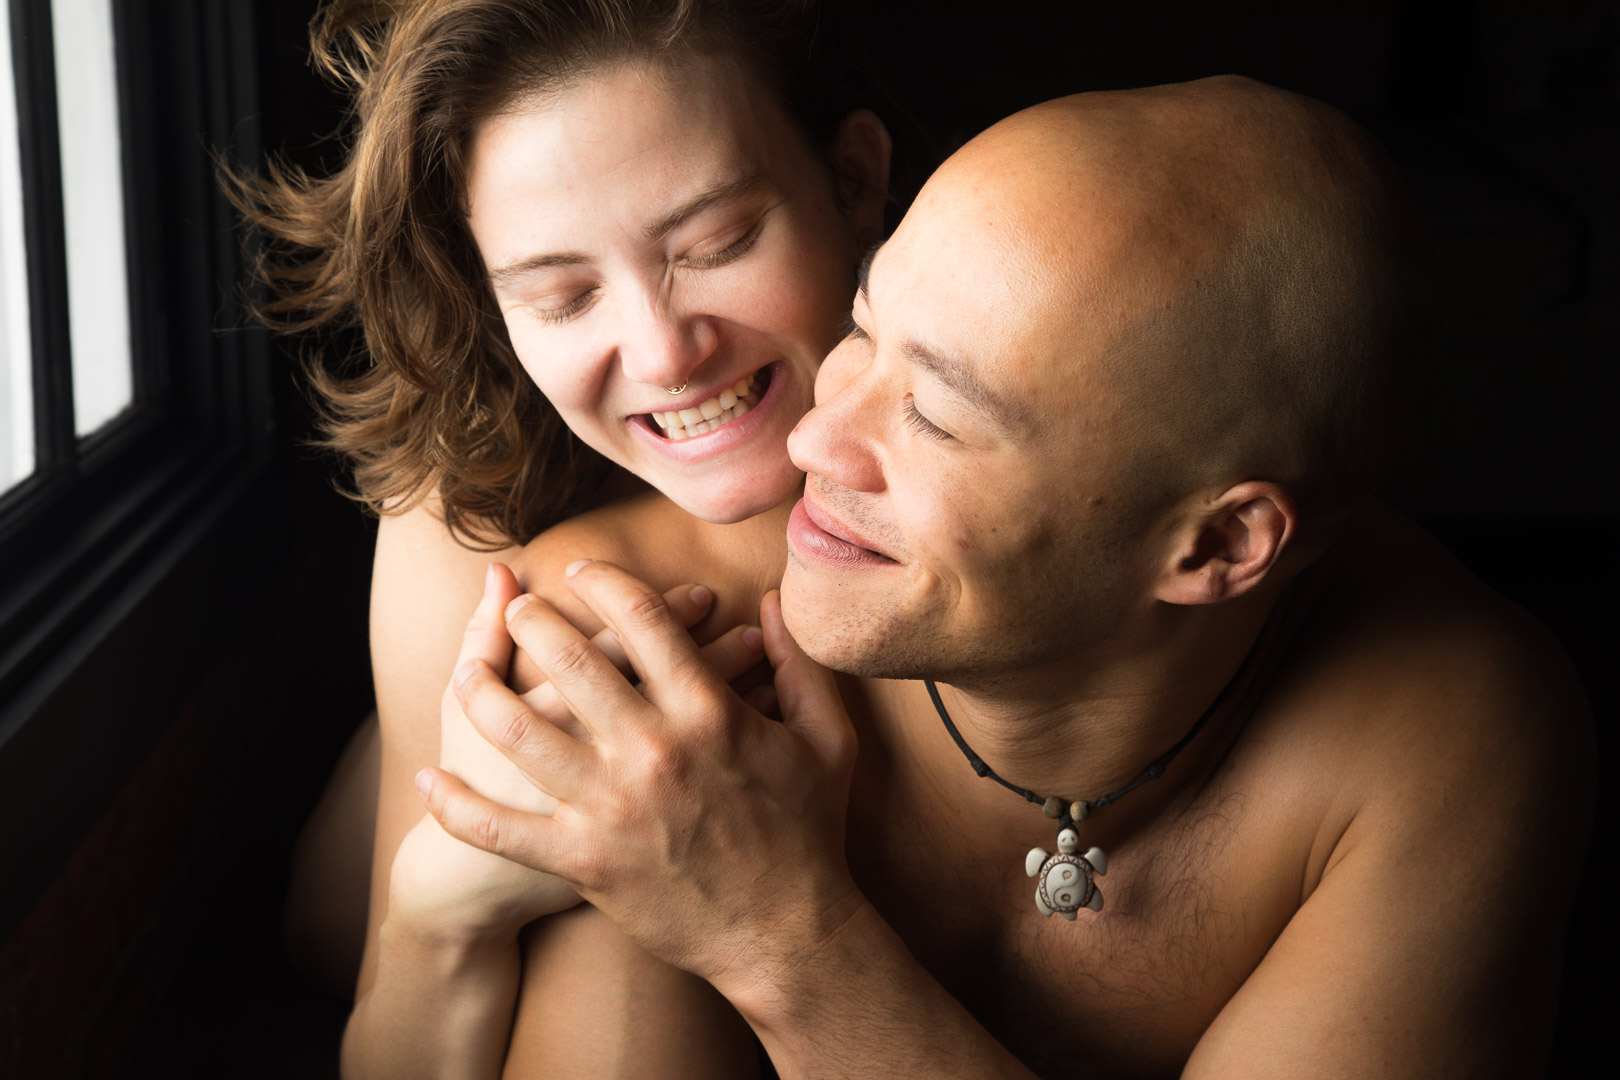 Couples boudoir image with a woman and a man, both nude and smiling, holding hands as the woman embraces the man from behind.